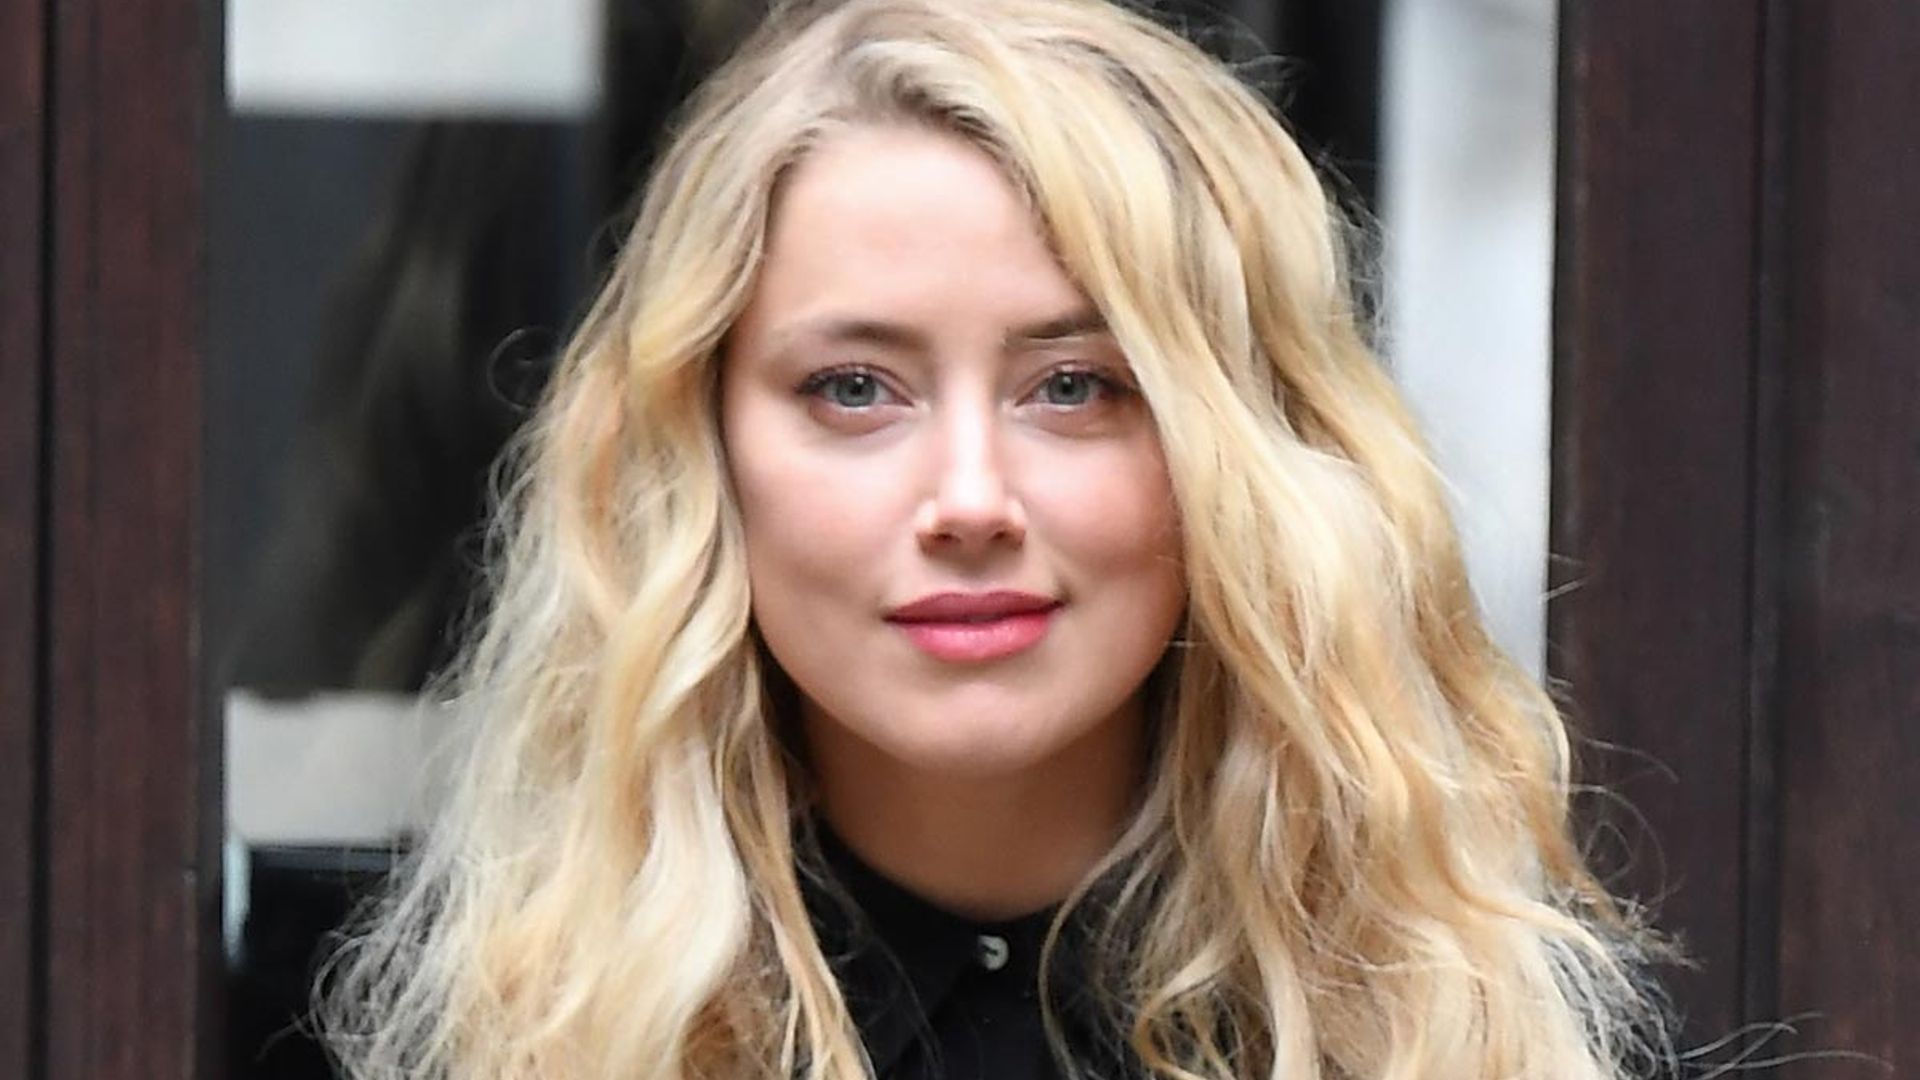 Amber Heard's workout photos with baby daughter Oonagh will surprise you